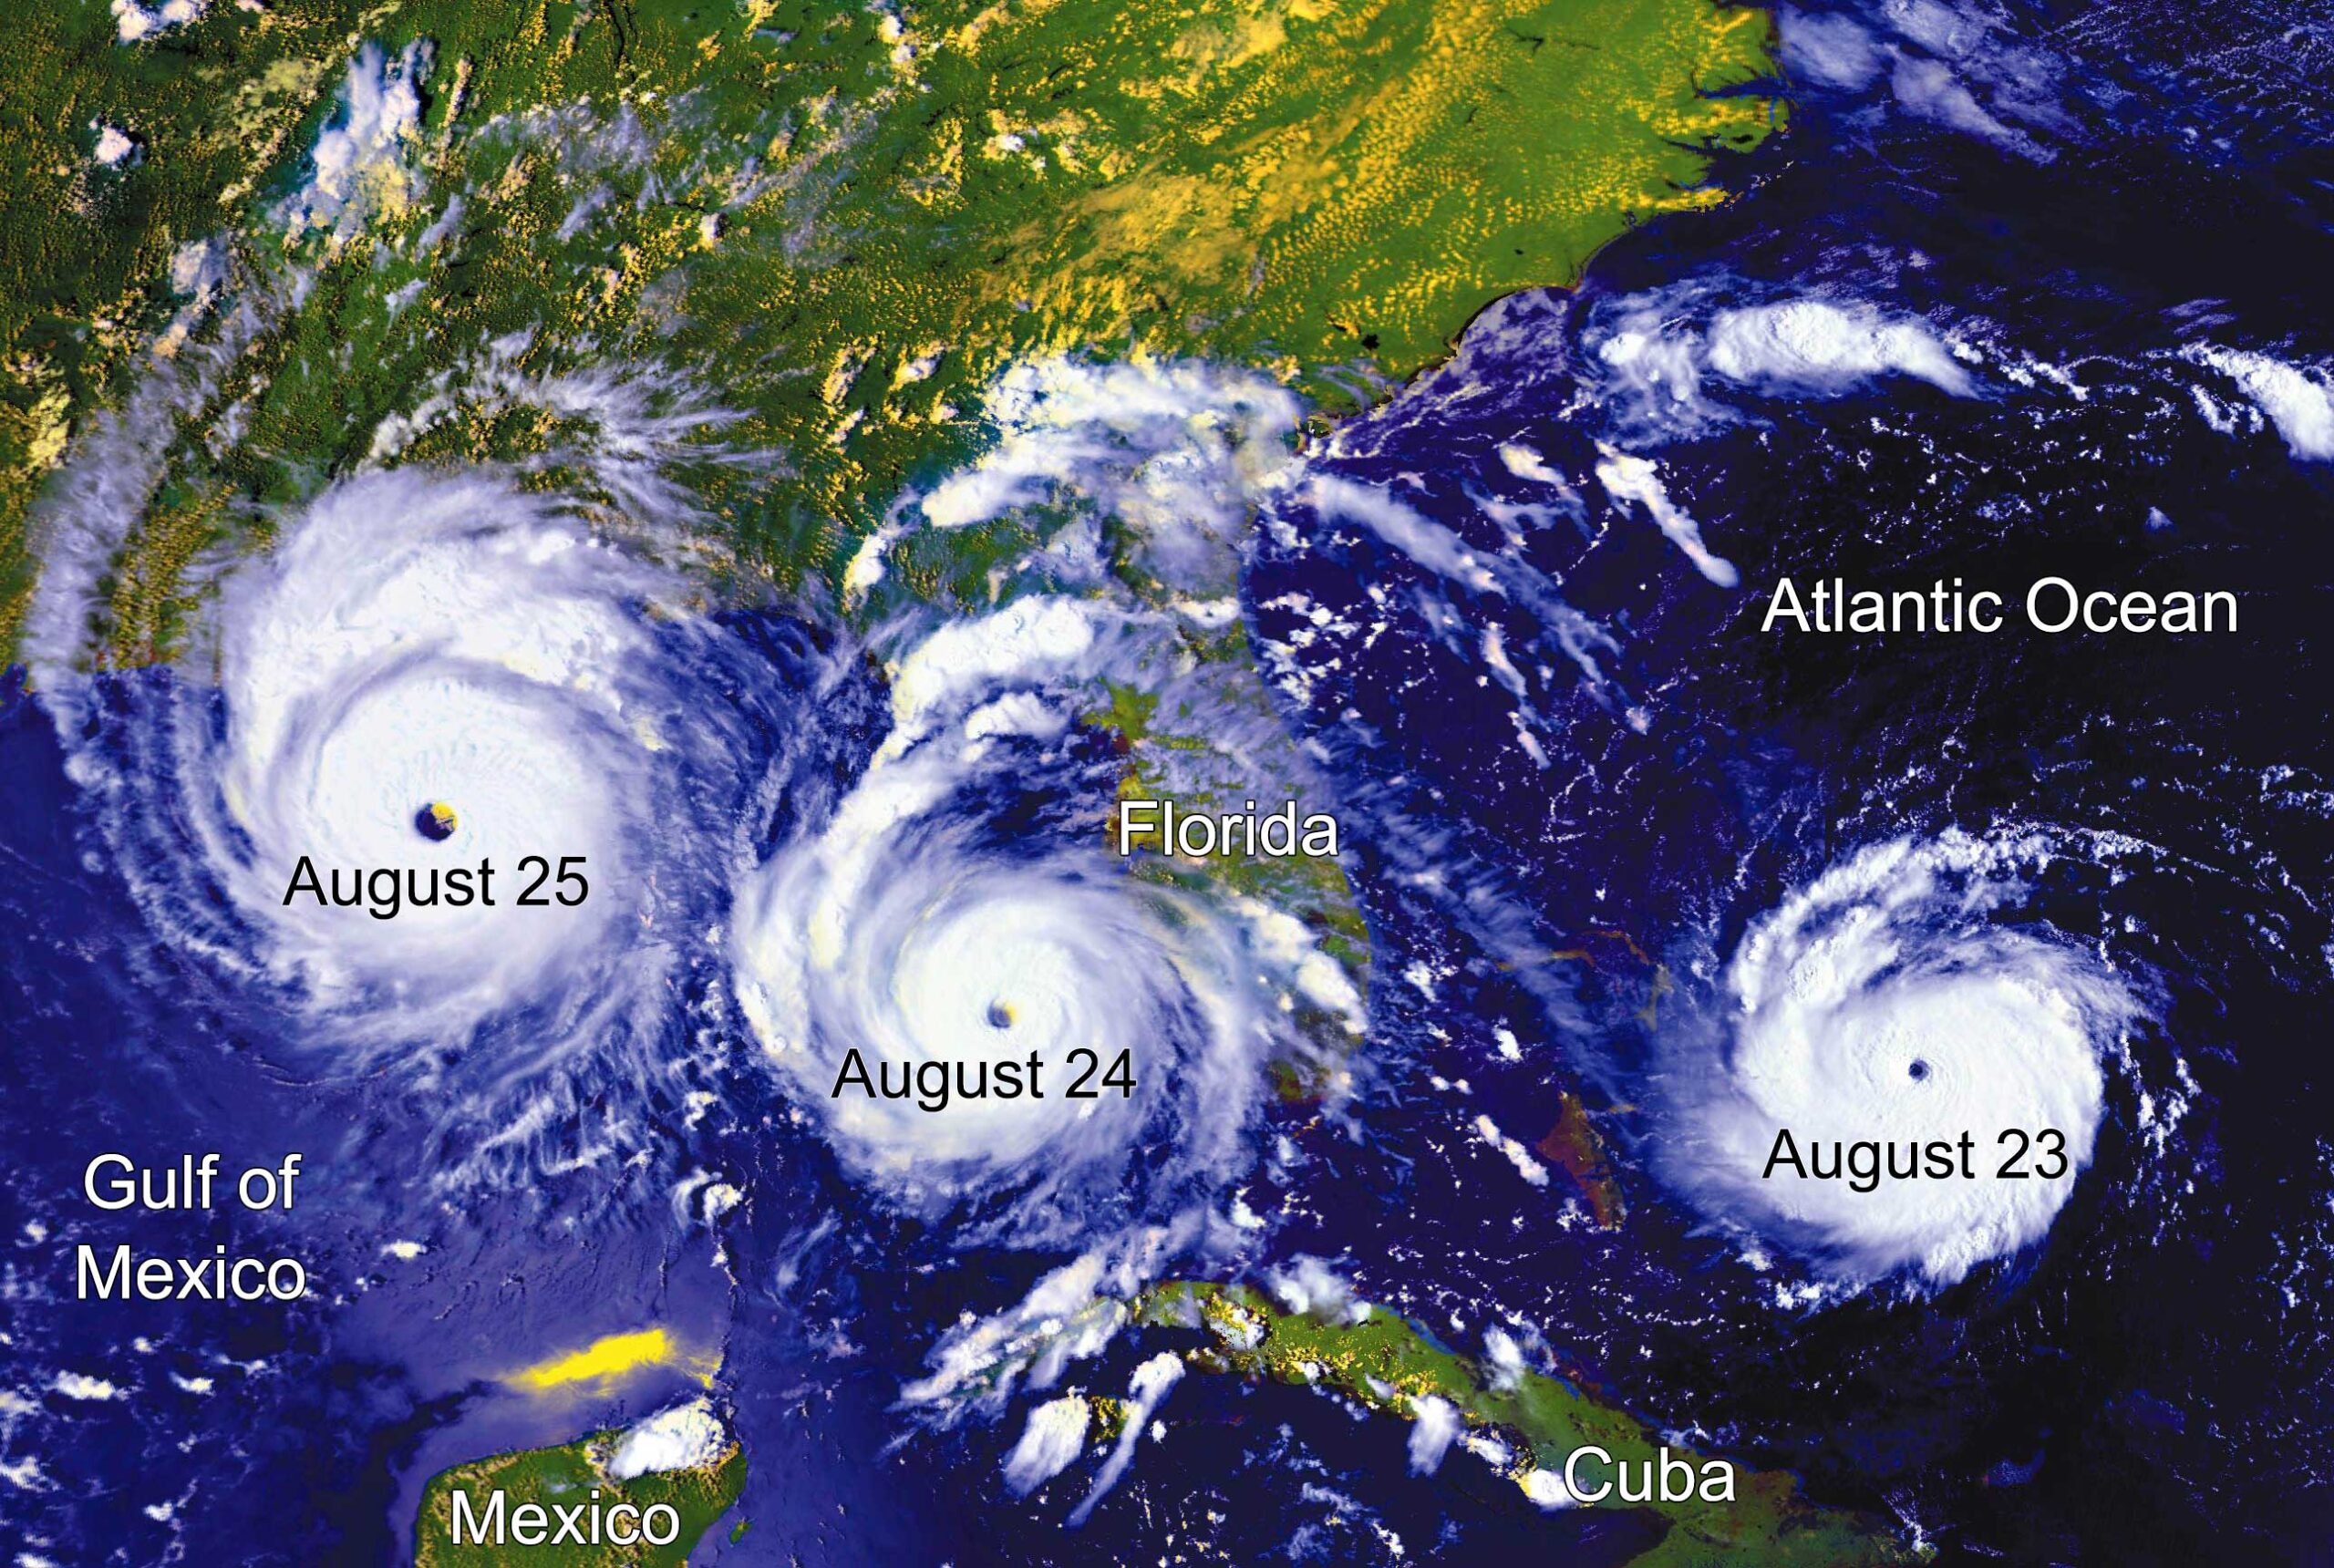 Composite satellite image of the path of Hurricane Andrew over 3 days, from August 23rd to 25th, 1992.